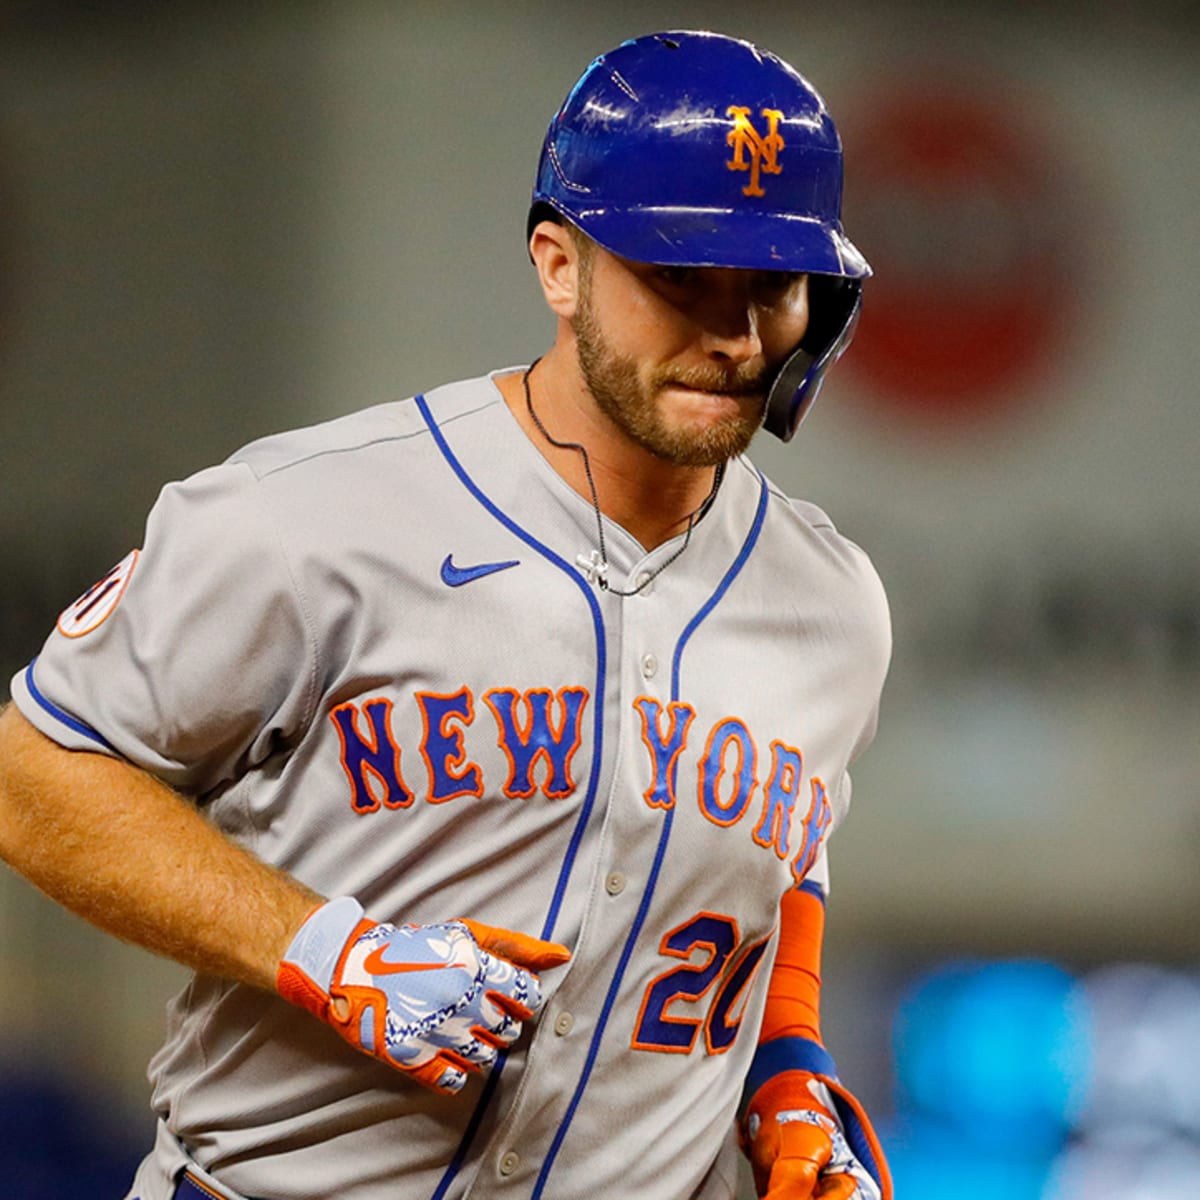 Pete Alonso survives 'brutal' car accident on way to Mets spring